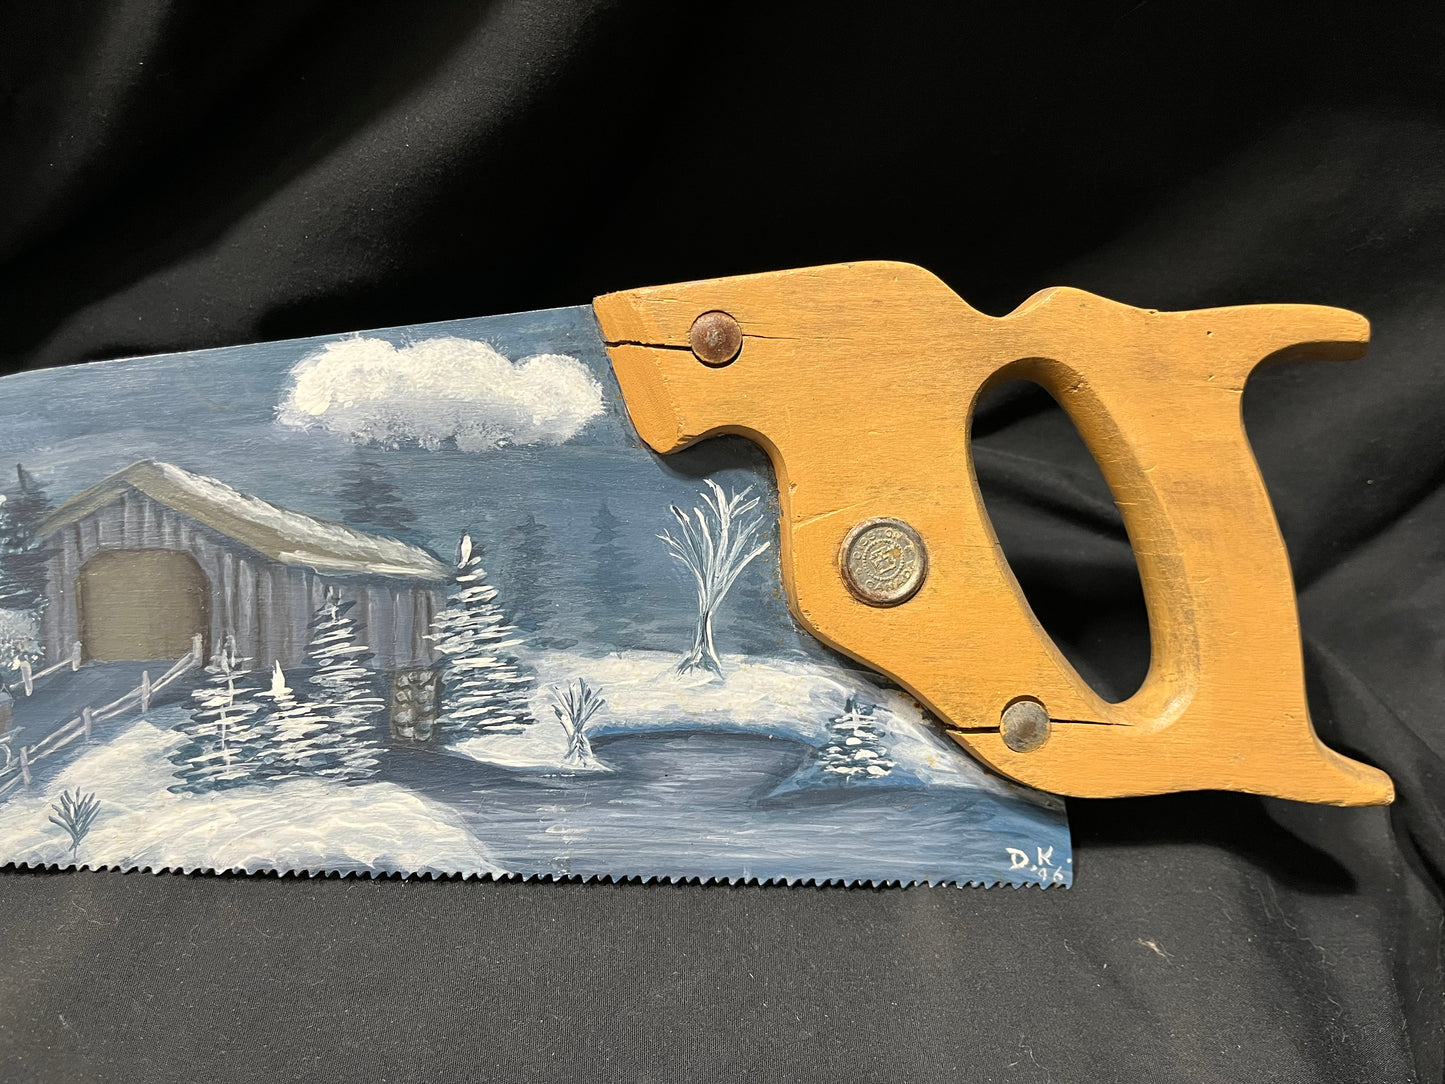 Hand Painted Vintage Hand Saw Signed D.K. '96